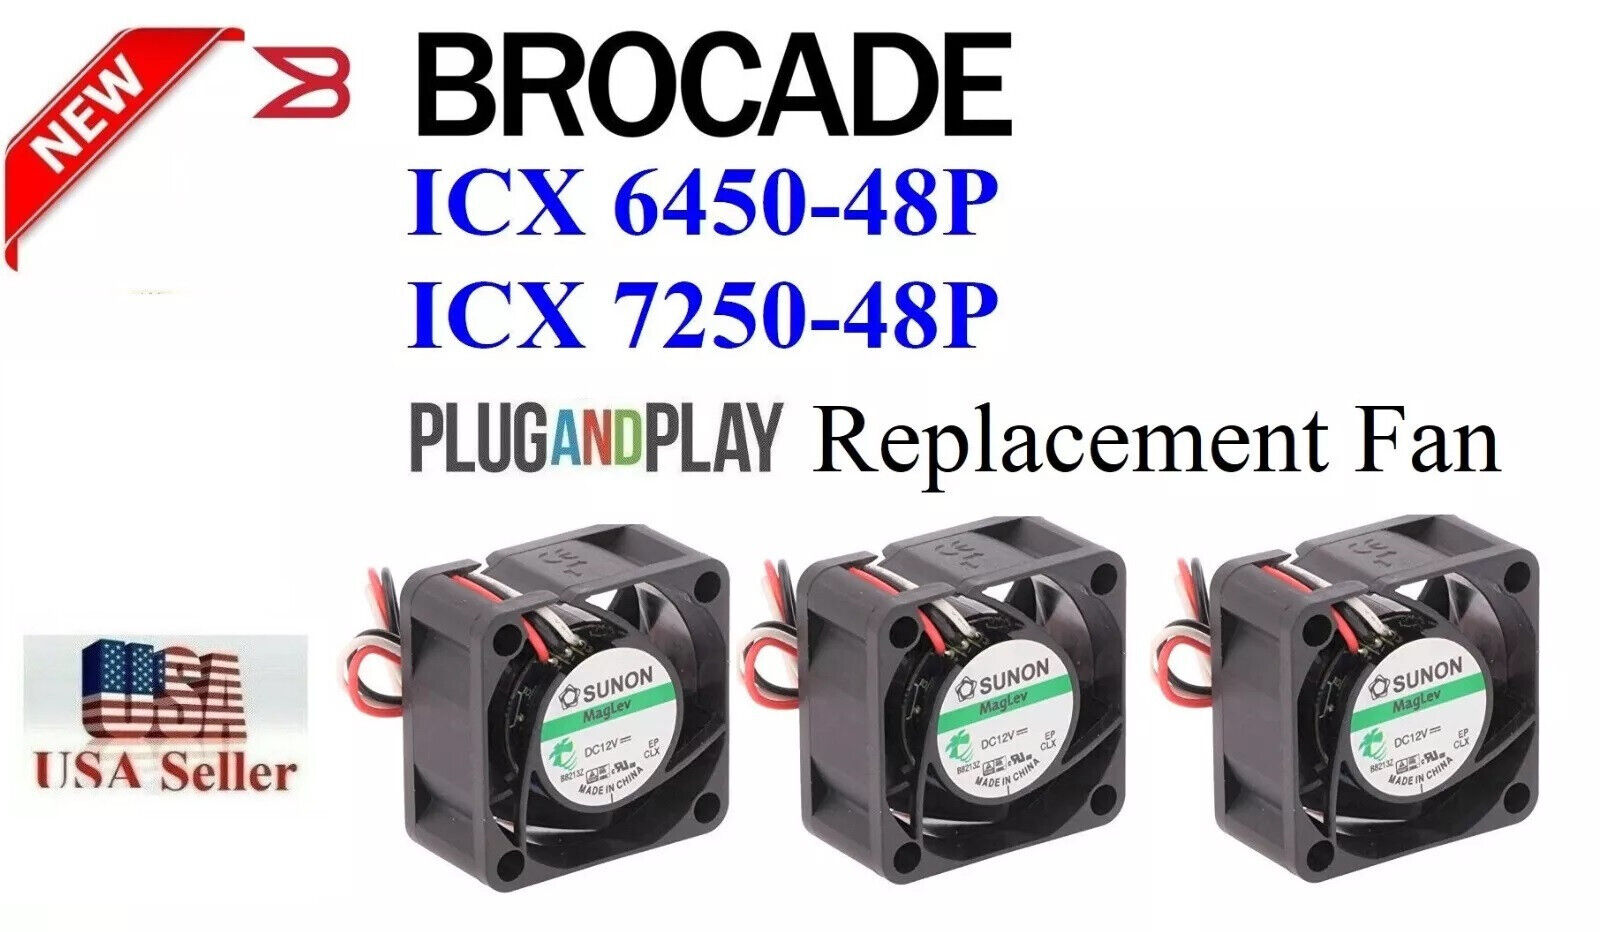 3x Brocade ICX 7250-48P, ICX 6450-48P (Plug-and-Play) Replacement Fans